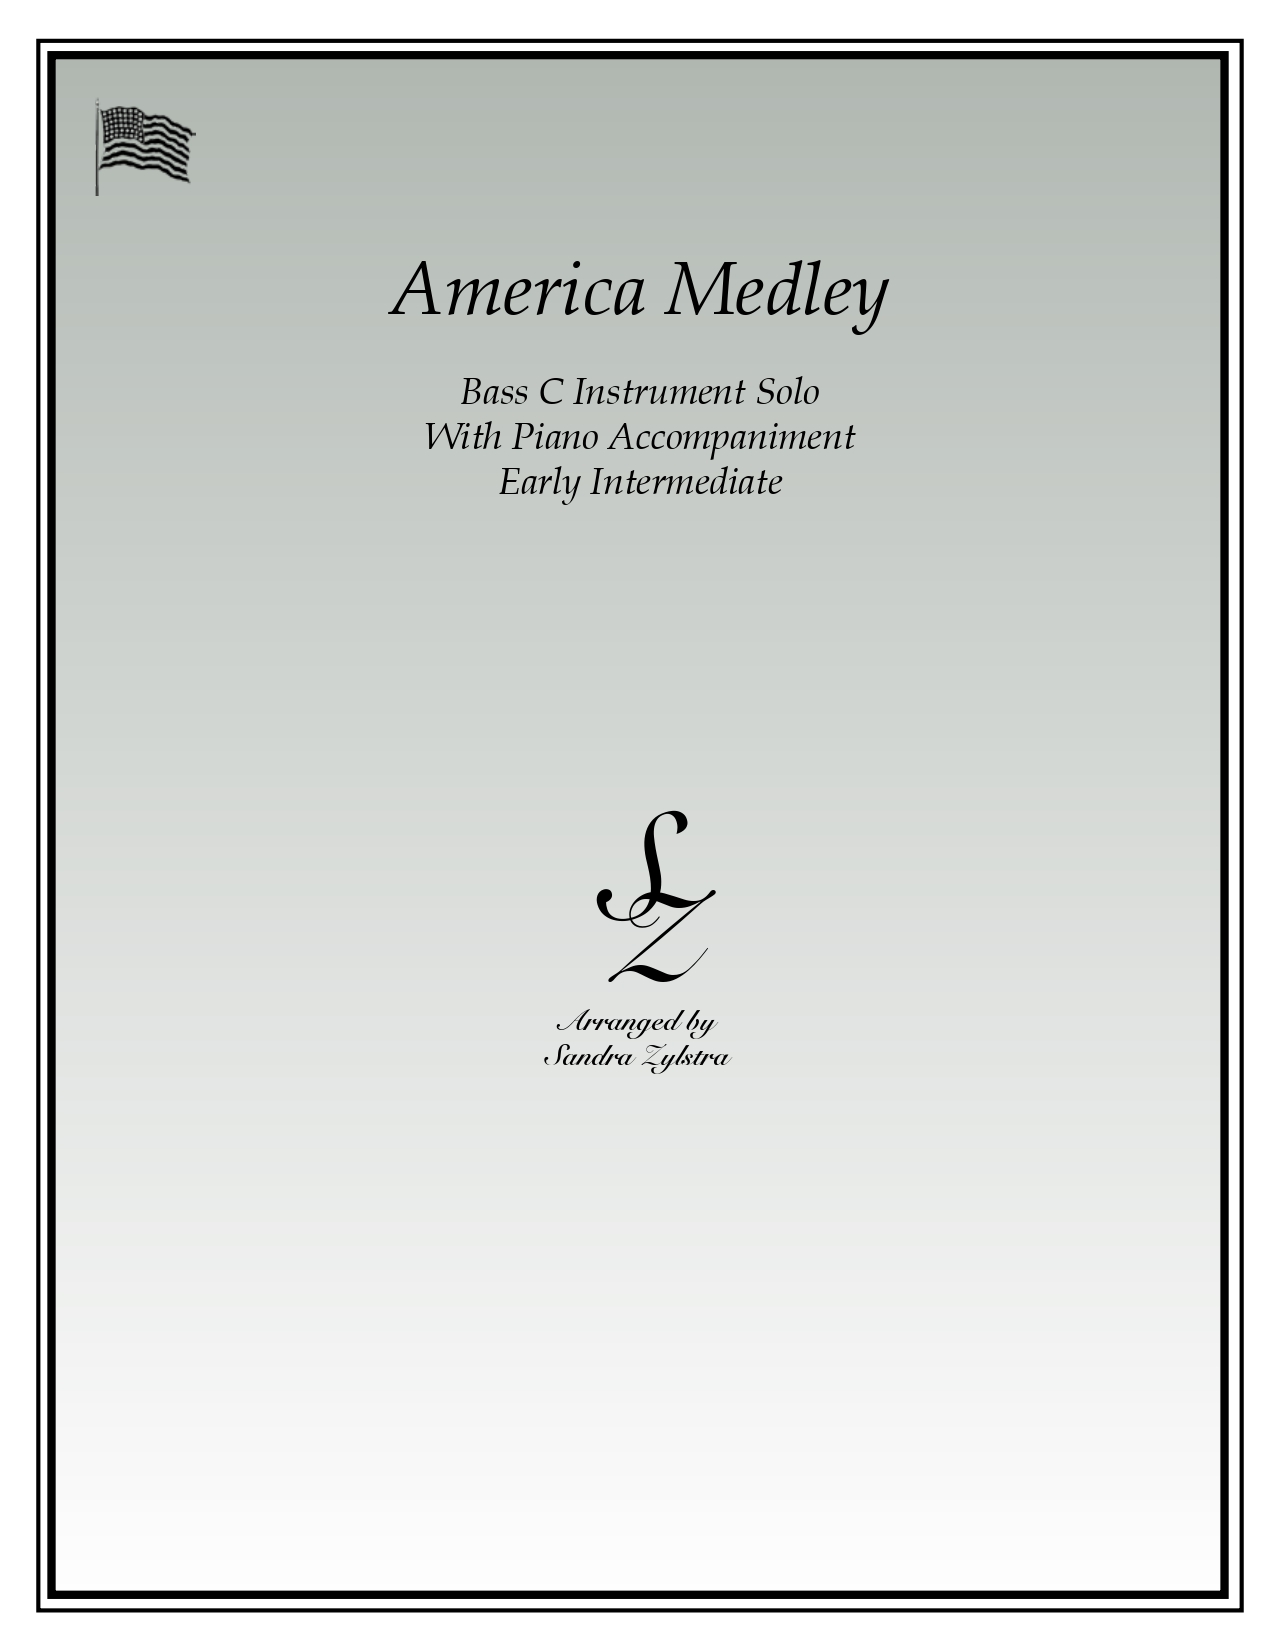 America Medley bass C instrument solo part cover page 00011